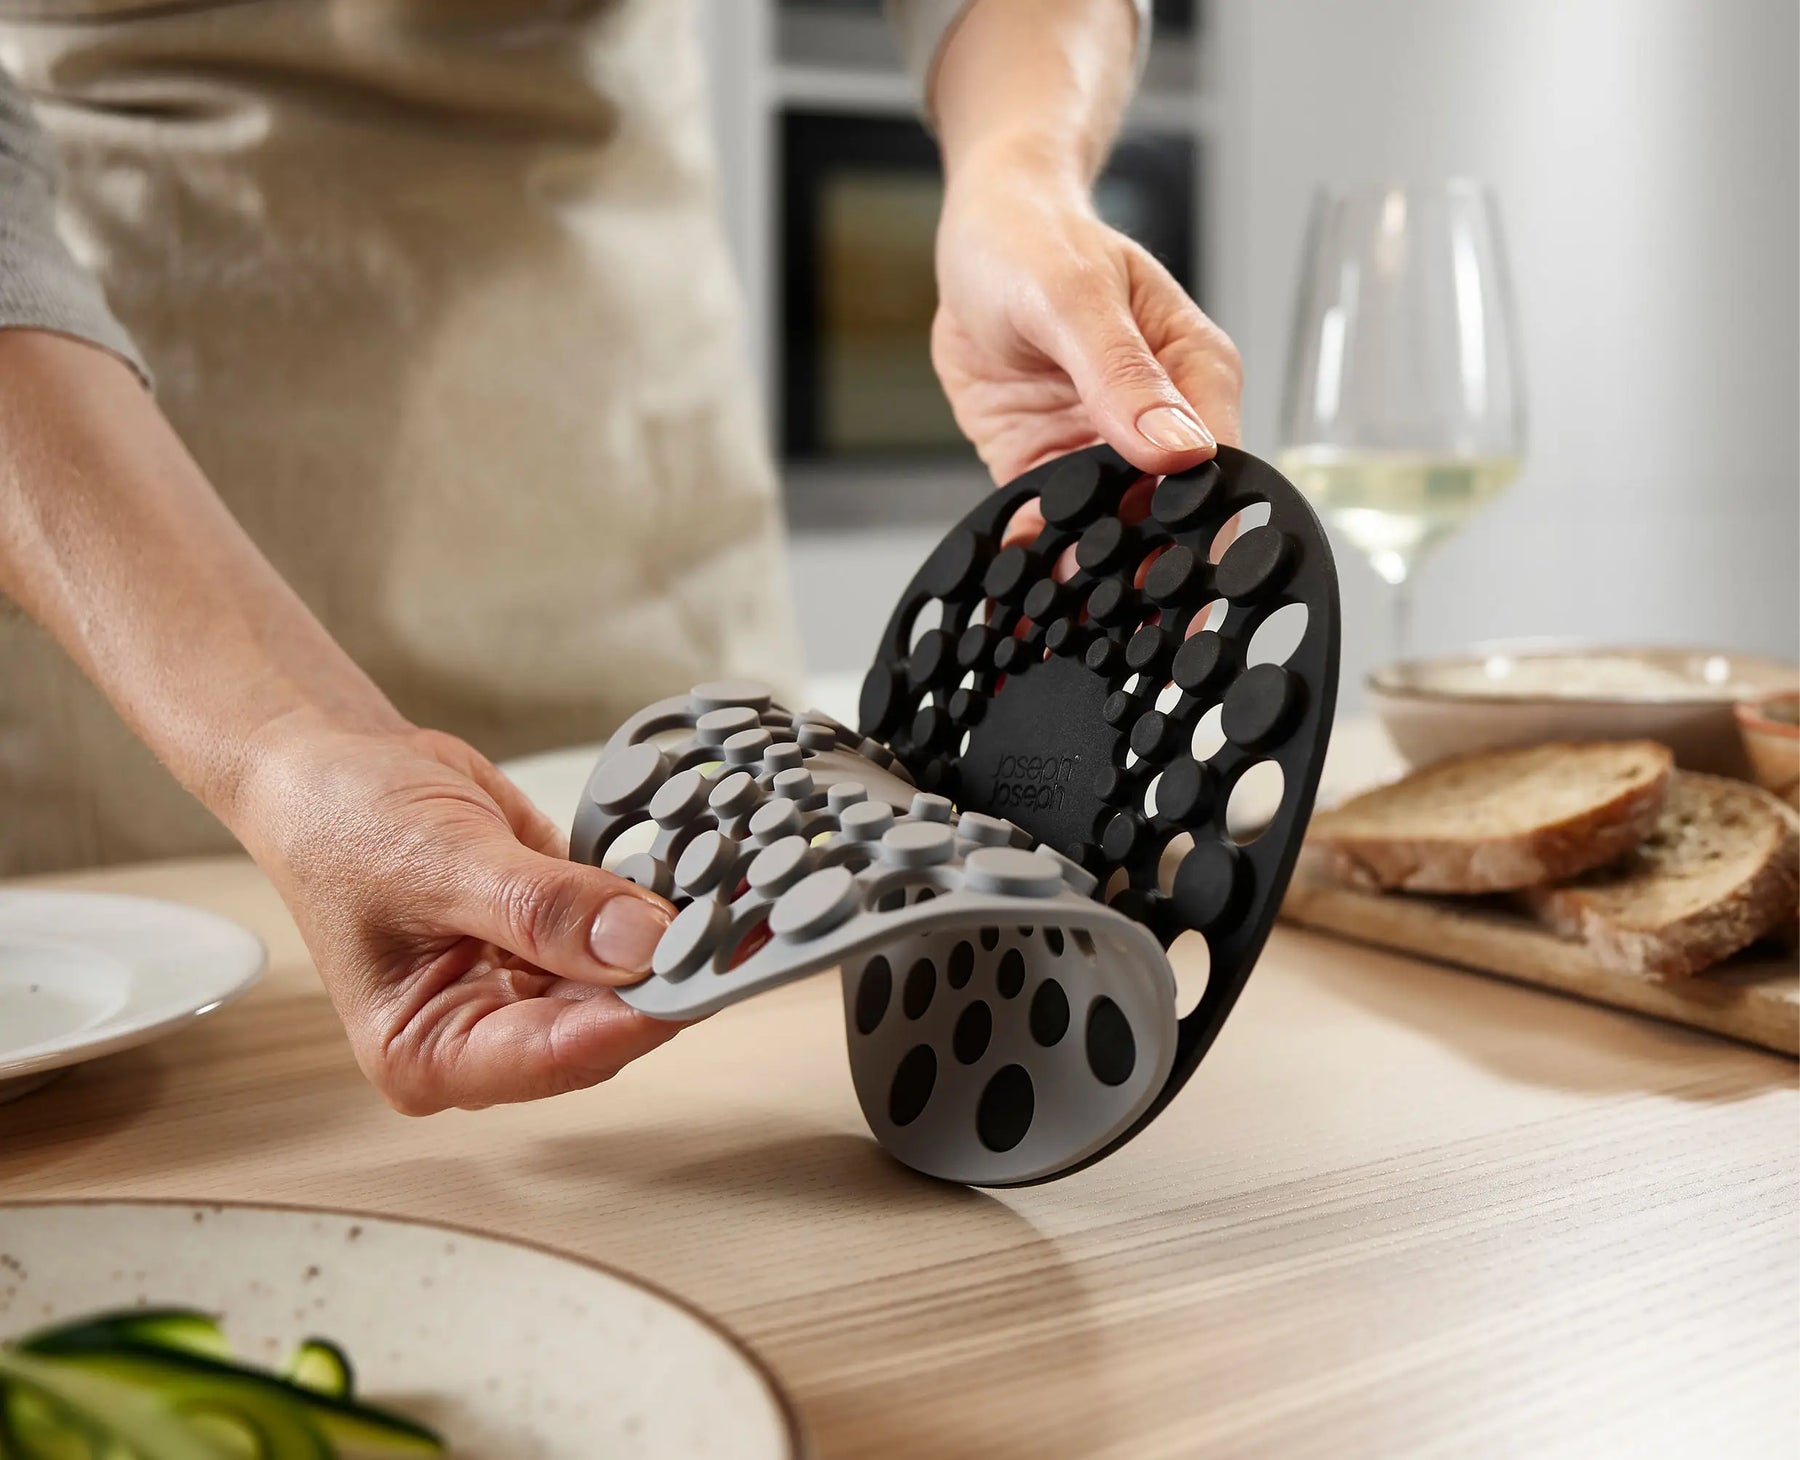 Spot-On™ Set of 2 Silicone Trivets